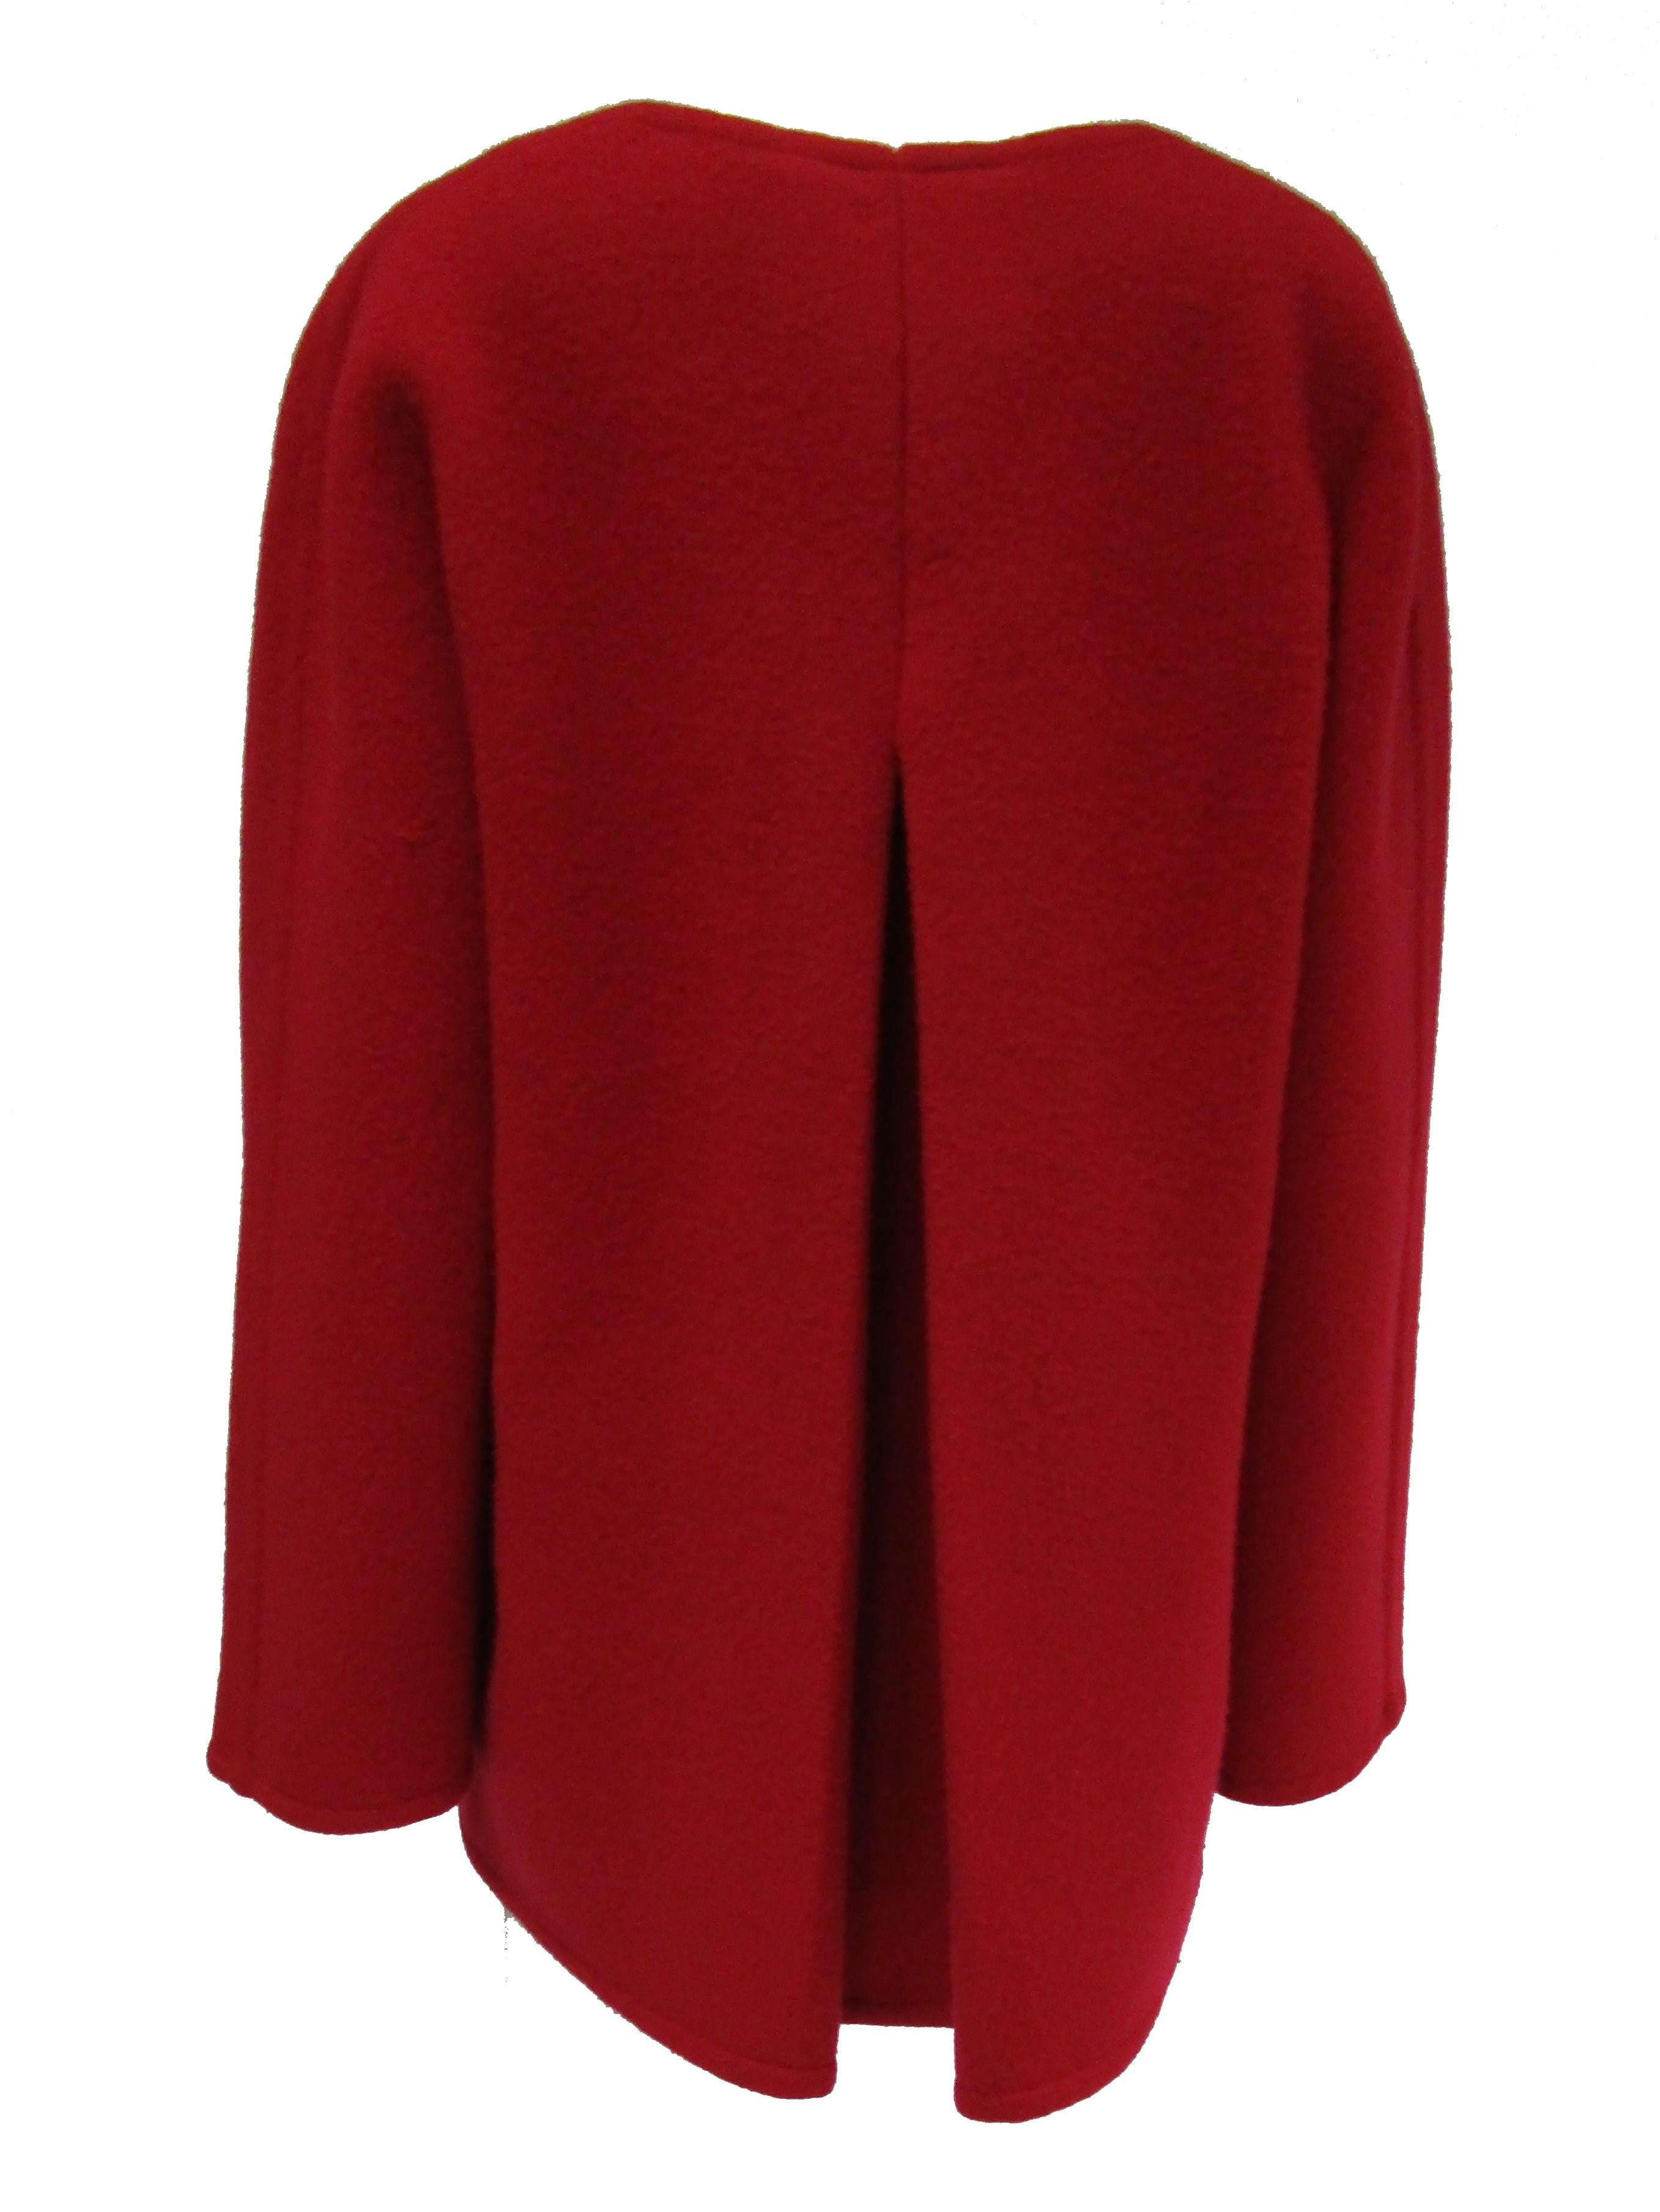 Women's 1980s Galanos Red Wool Round Shoulder Coat with Oversized Double Breast Buttons 